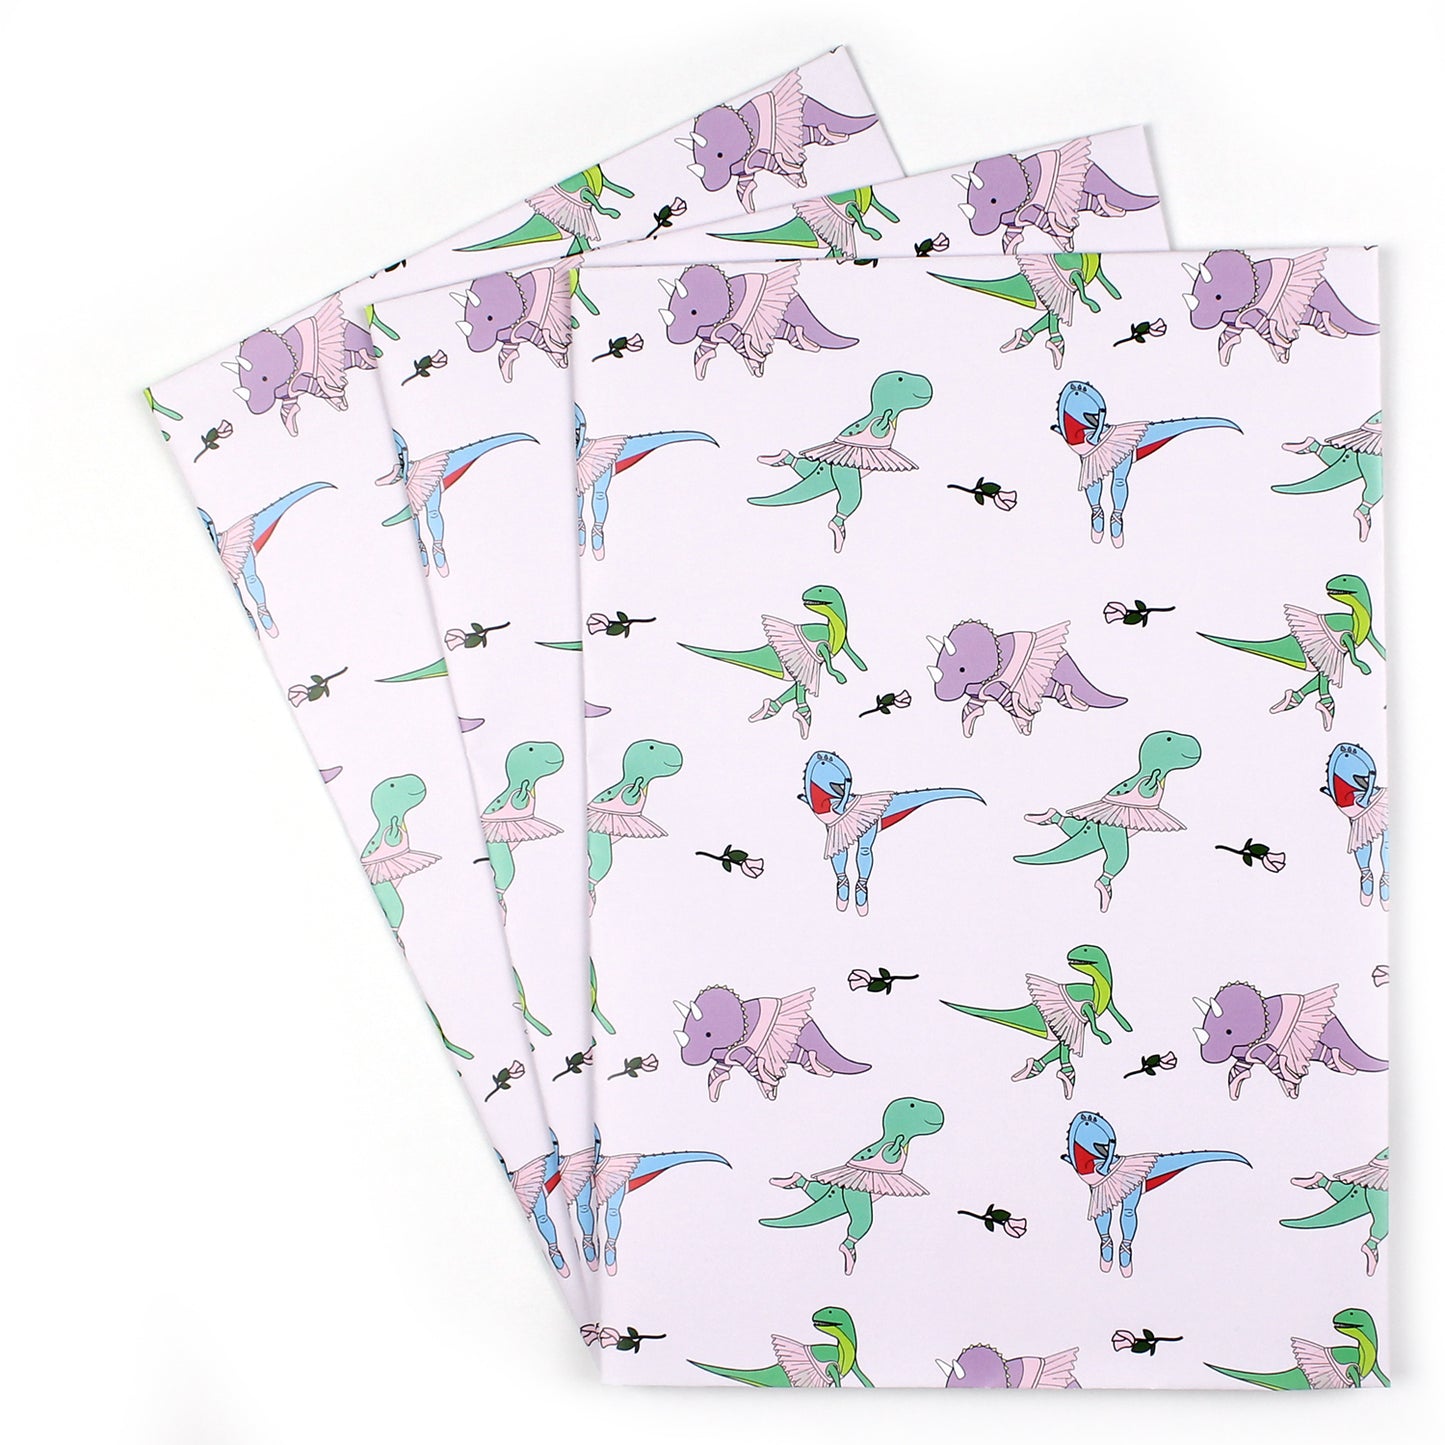 3 sheets of ballet dinosaur wrapping paper fanned out